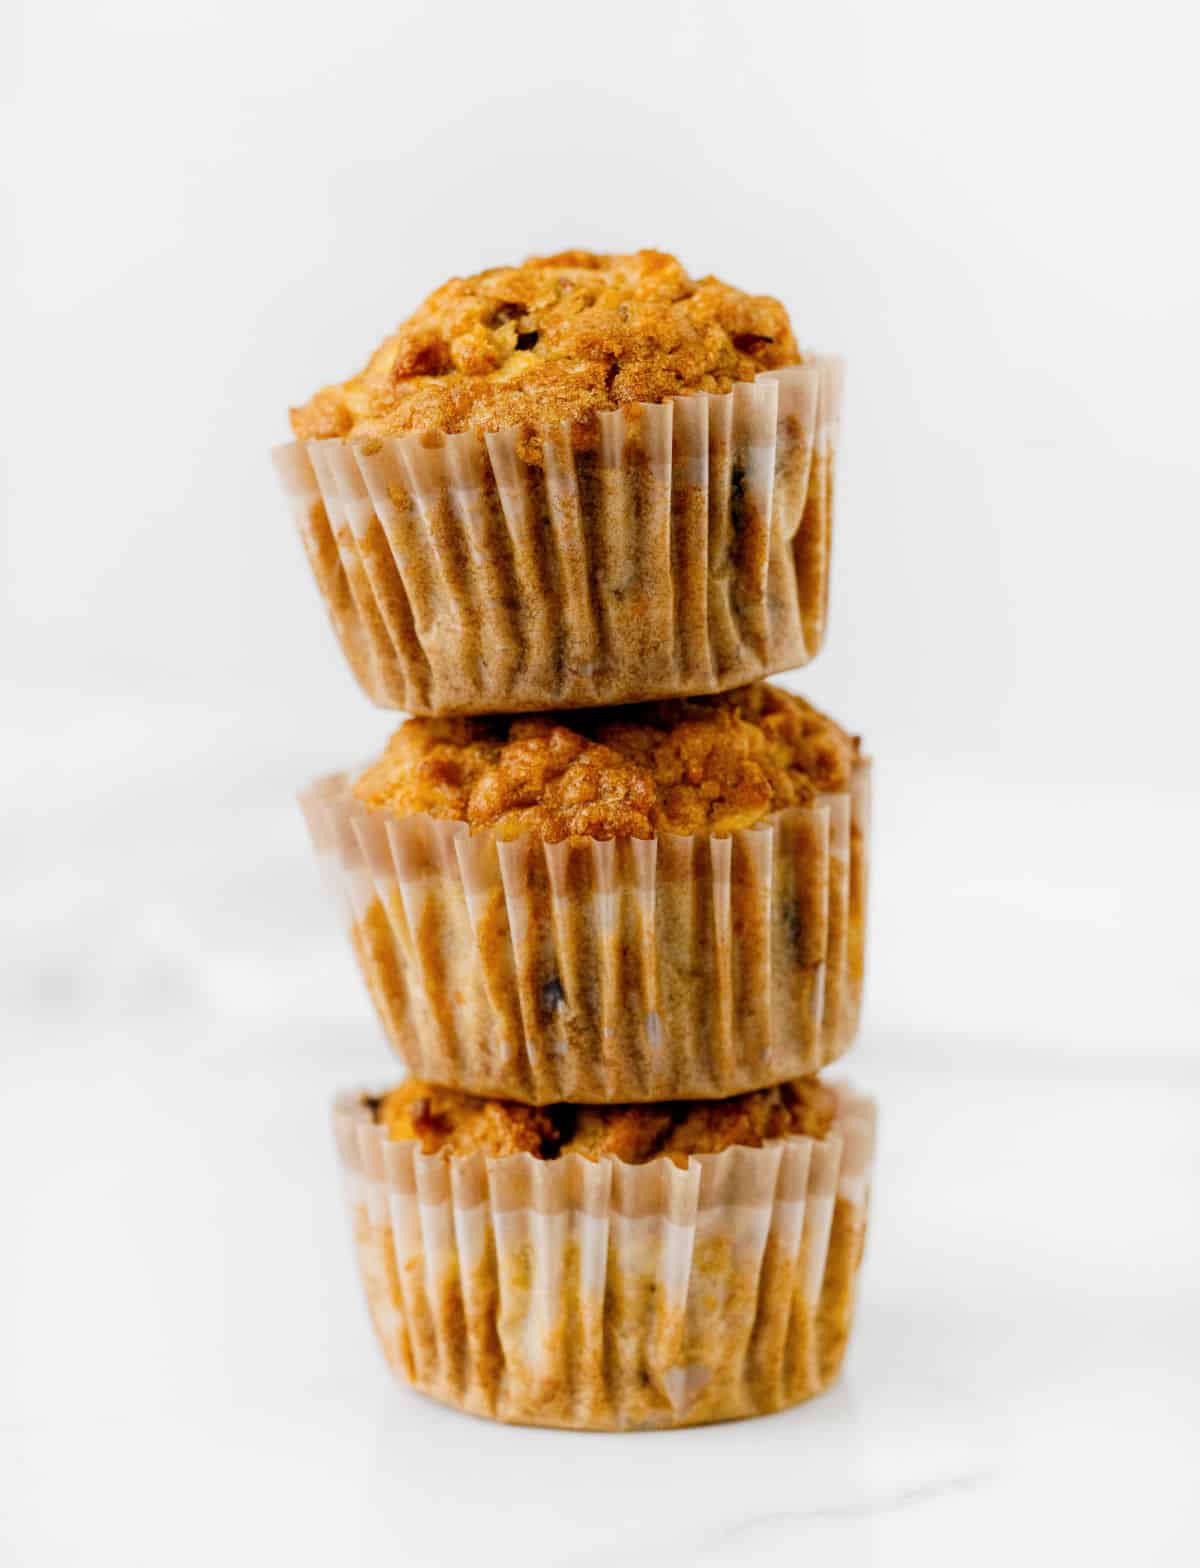 Stack of three carrot muffins in paper liner on white marble surface and background. 